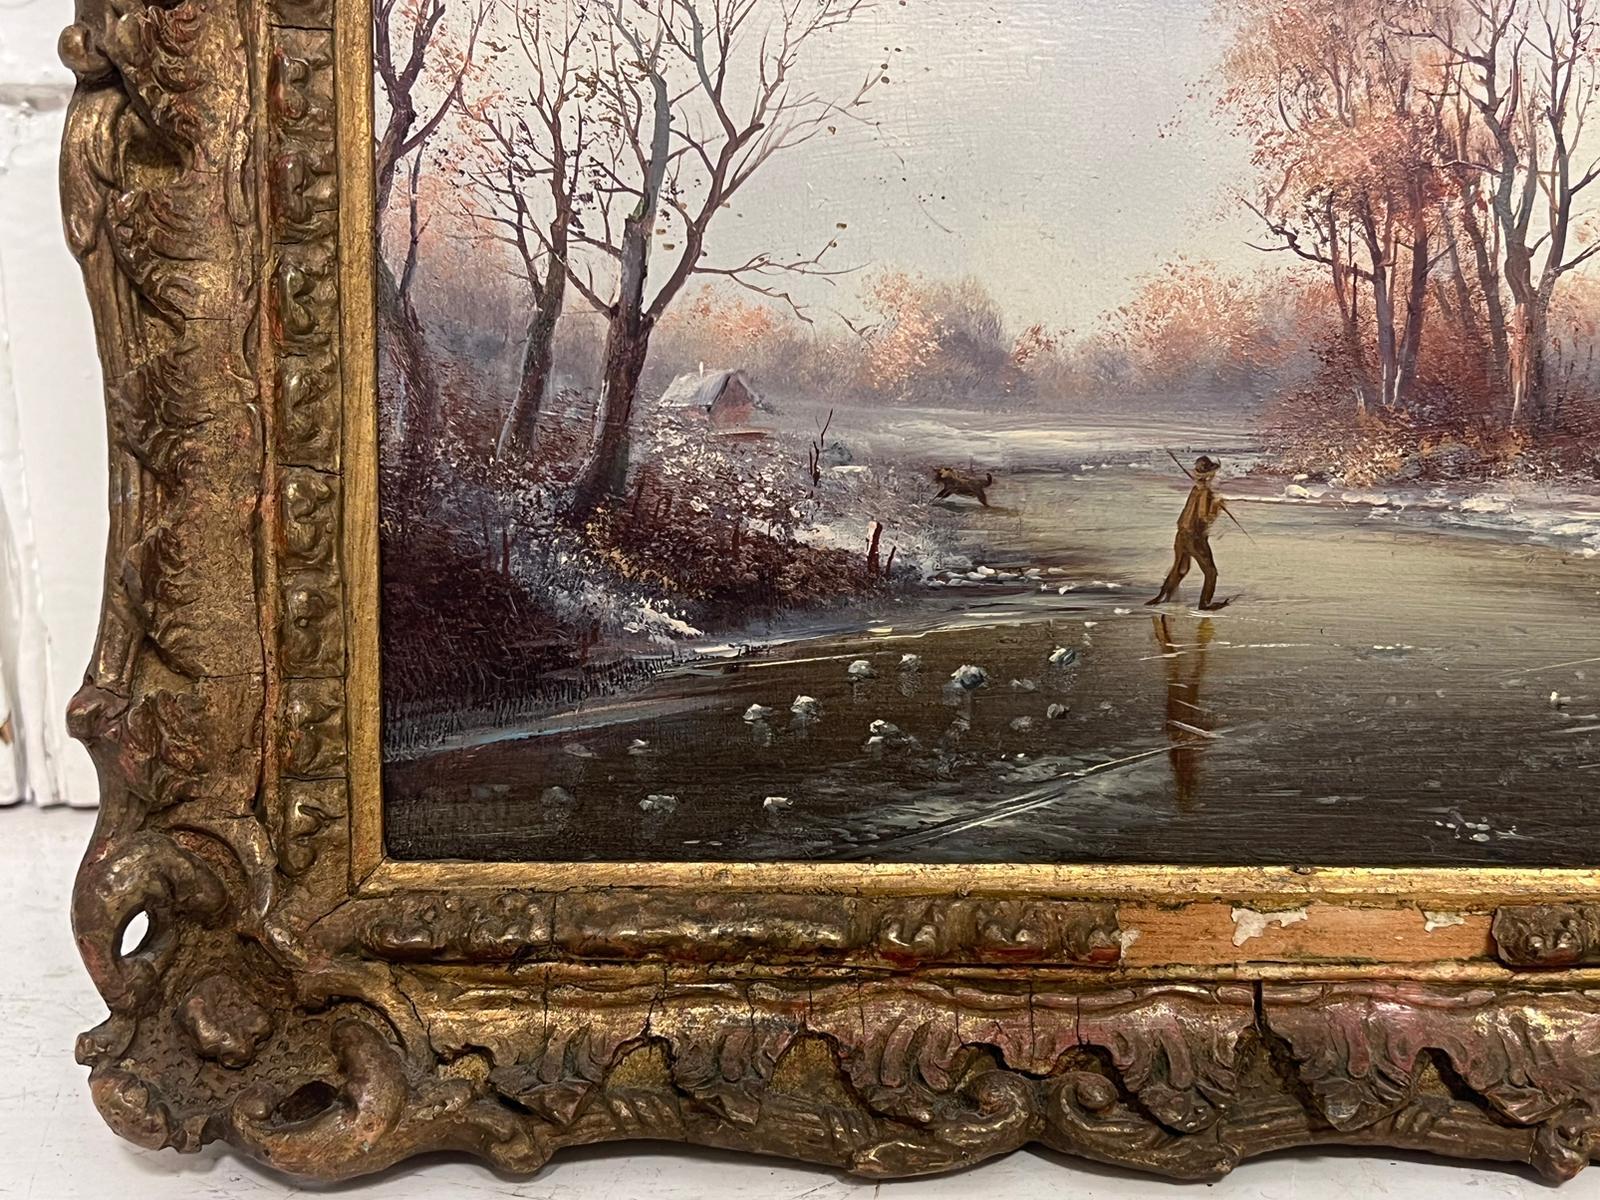 Winter Sports
Dutch School, 20th century
signed oil on board, framed
framed: 14 x 18 inches
board: 13 x 17 inches
provenance: private collection, UK
condition: very good and sound condition